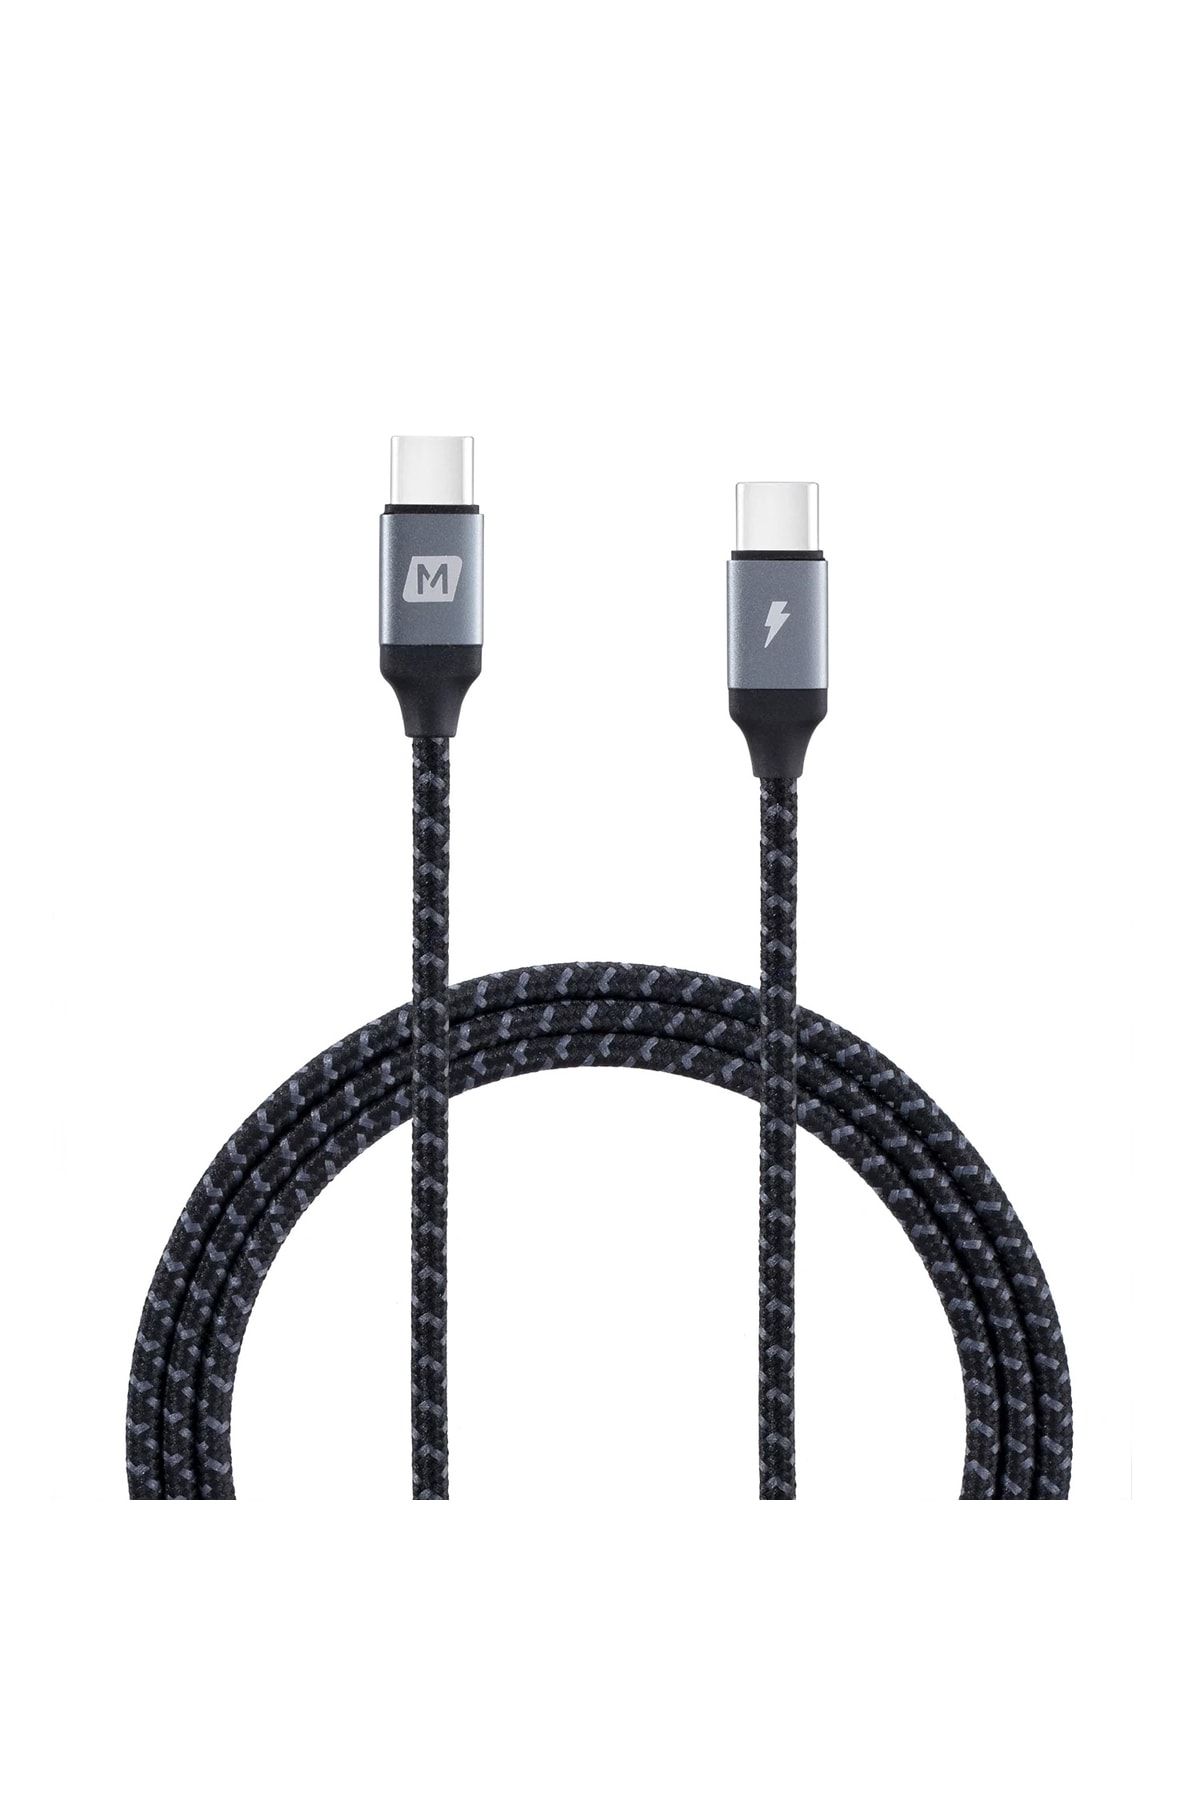 Momax Zero Usb-c To Usb-c Cable (1.2m) Support Pd 60w